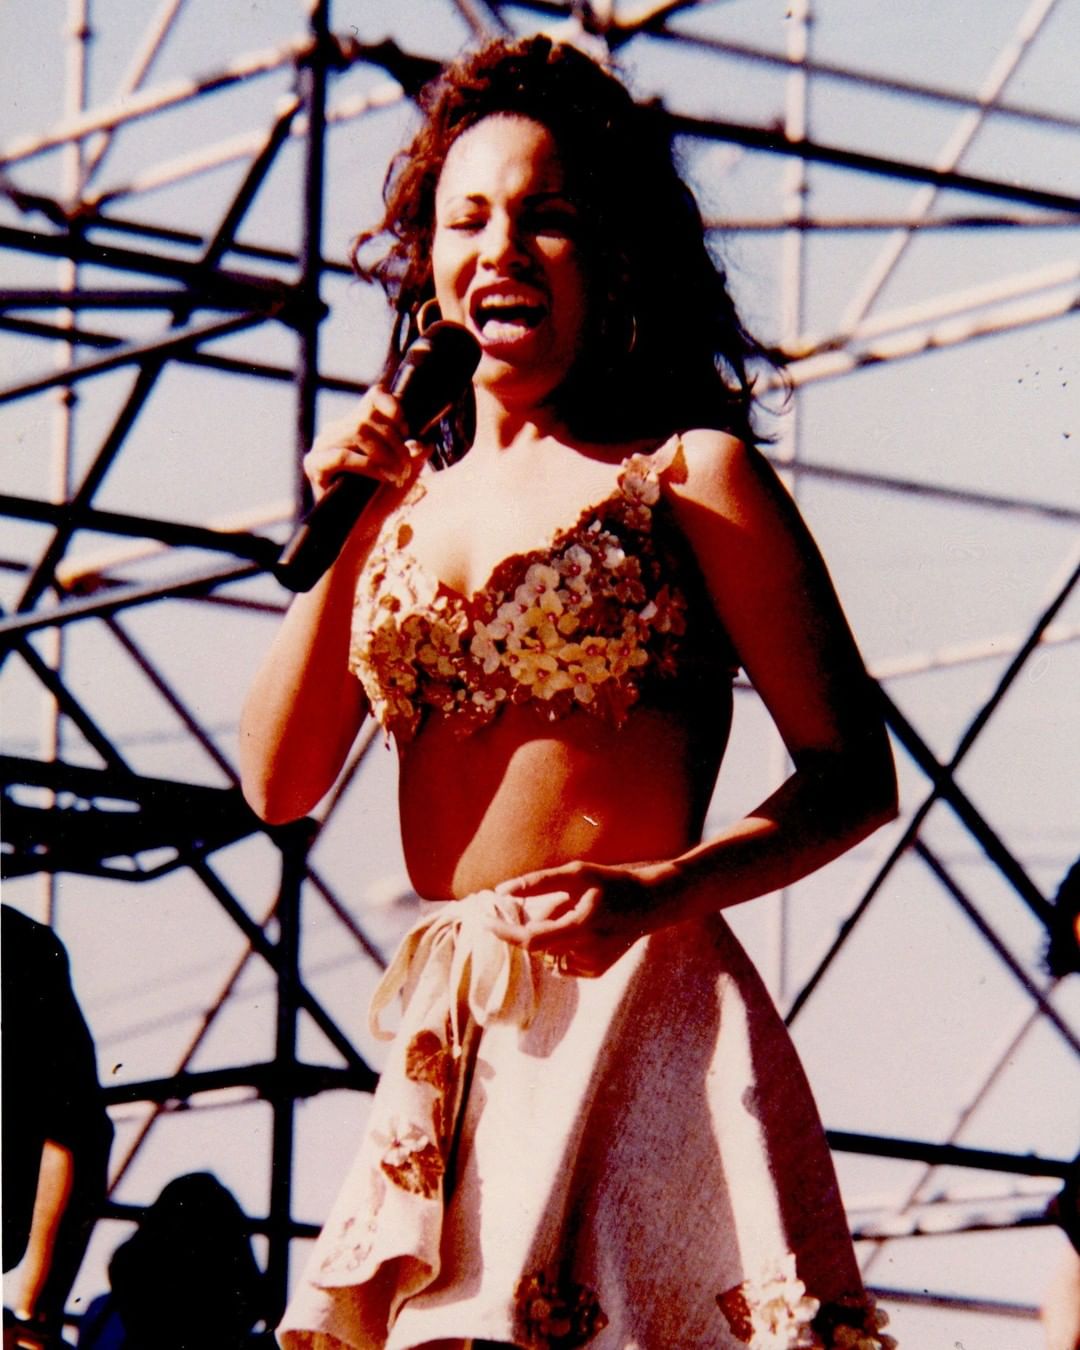 Happy International Women’s day y’all 💕🎉🤩 In honor of celebrating women, here’s a throwback pic of an iconic woman performing at the 1994 State Fair of Texas…. Selena! #InternationalWomensDay #TexasIcons #StateFairofTX